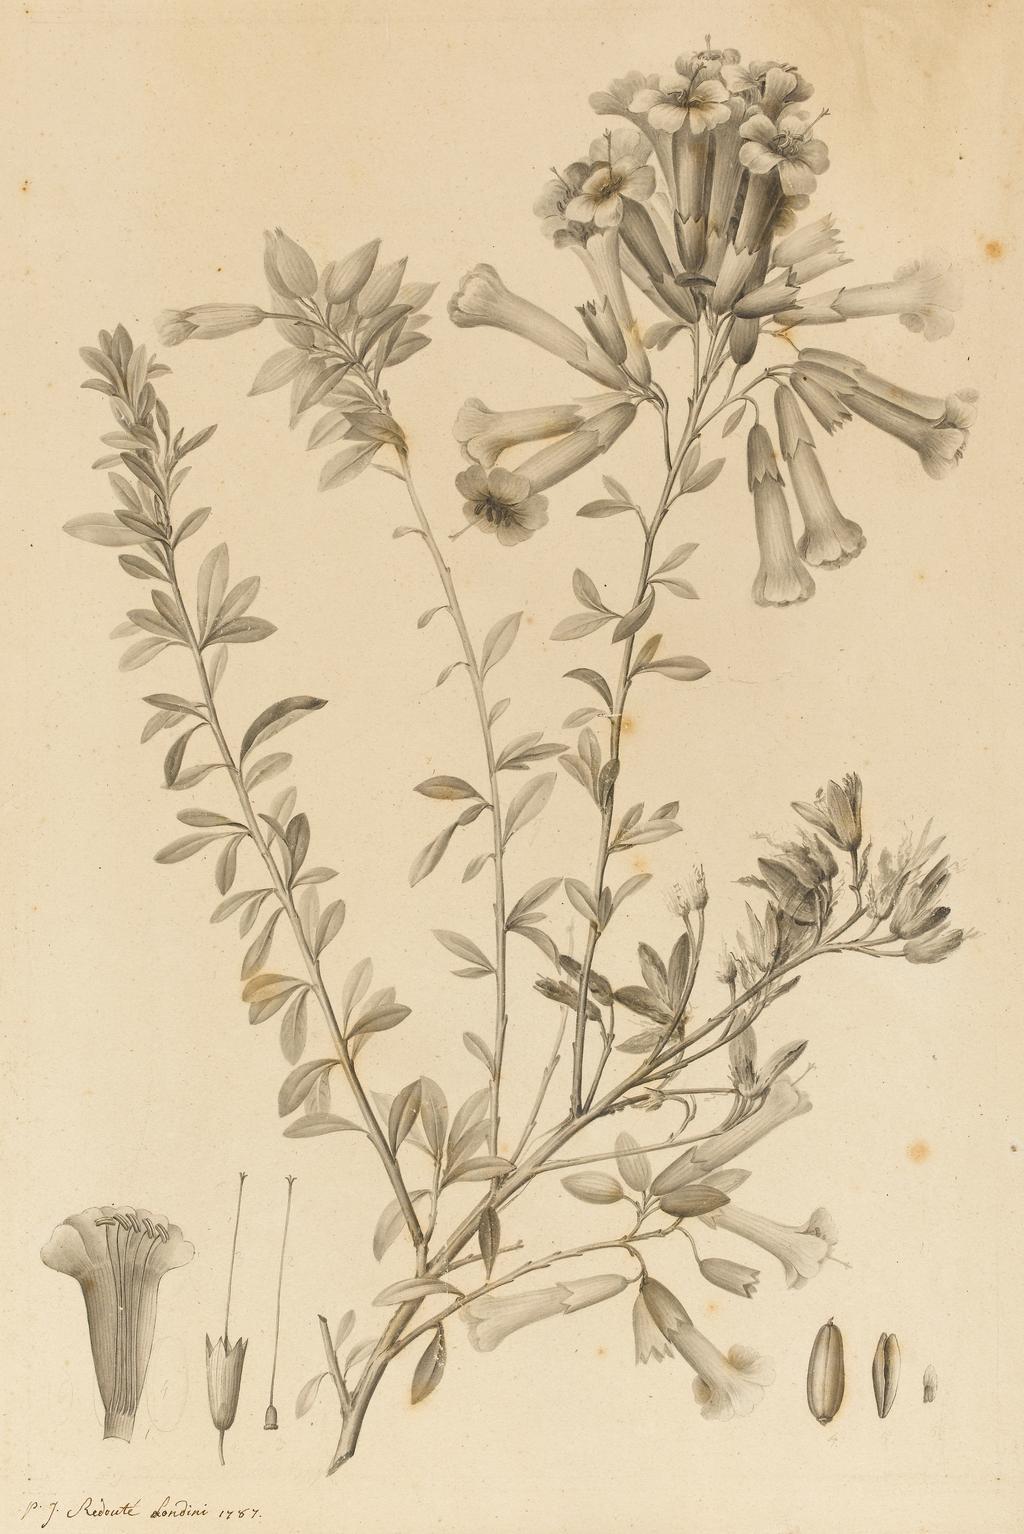 An image of Periphragmos Species. Redouté, Pierre Joseph (Flemish, 1759-1840). Black ink and grey wash on paper, stuck down on brown mount with gold edging. height: (sheet size): 376 mm, width: (sheet size): 252 mm. 1787.